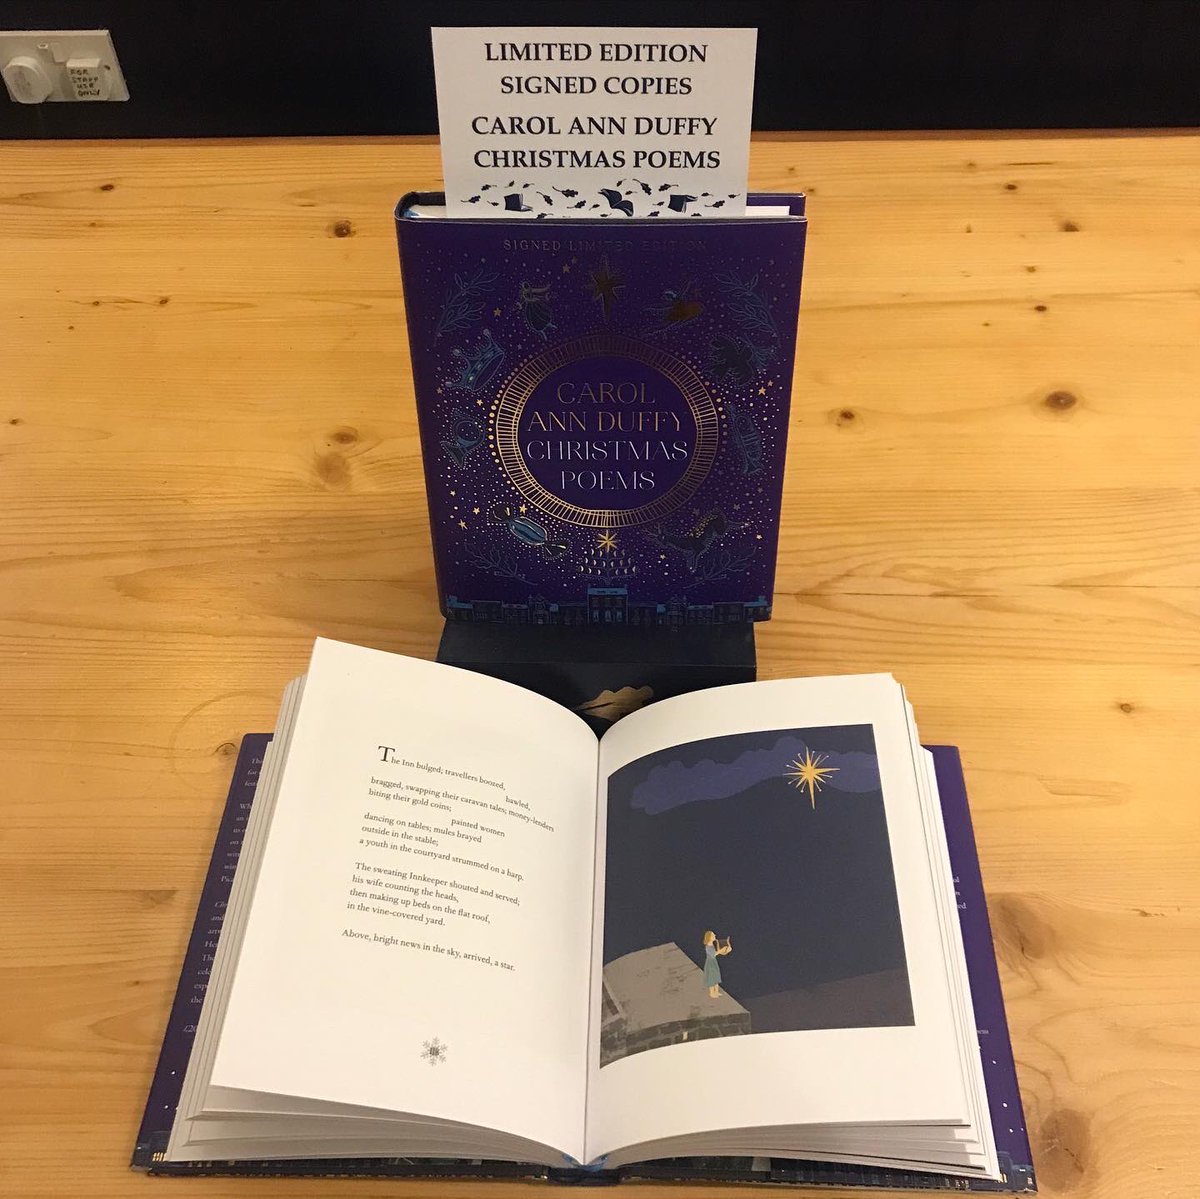 undskyldning browser bedstemor Sevenoaks Bookshop on Twitter: "This beautifully illustrated collection  brings you Carol Ann Duffy's most loved festive poems from her decade as  Poet Laureate. We have limited edition signed copies that make the